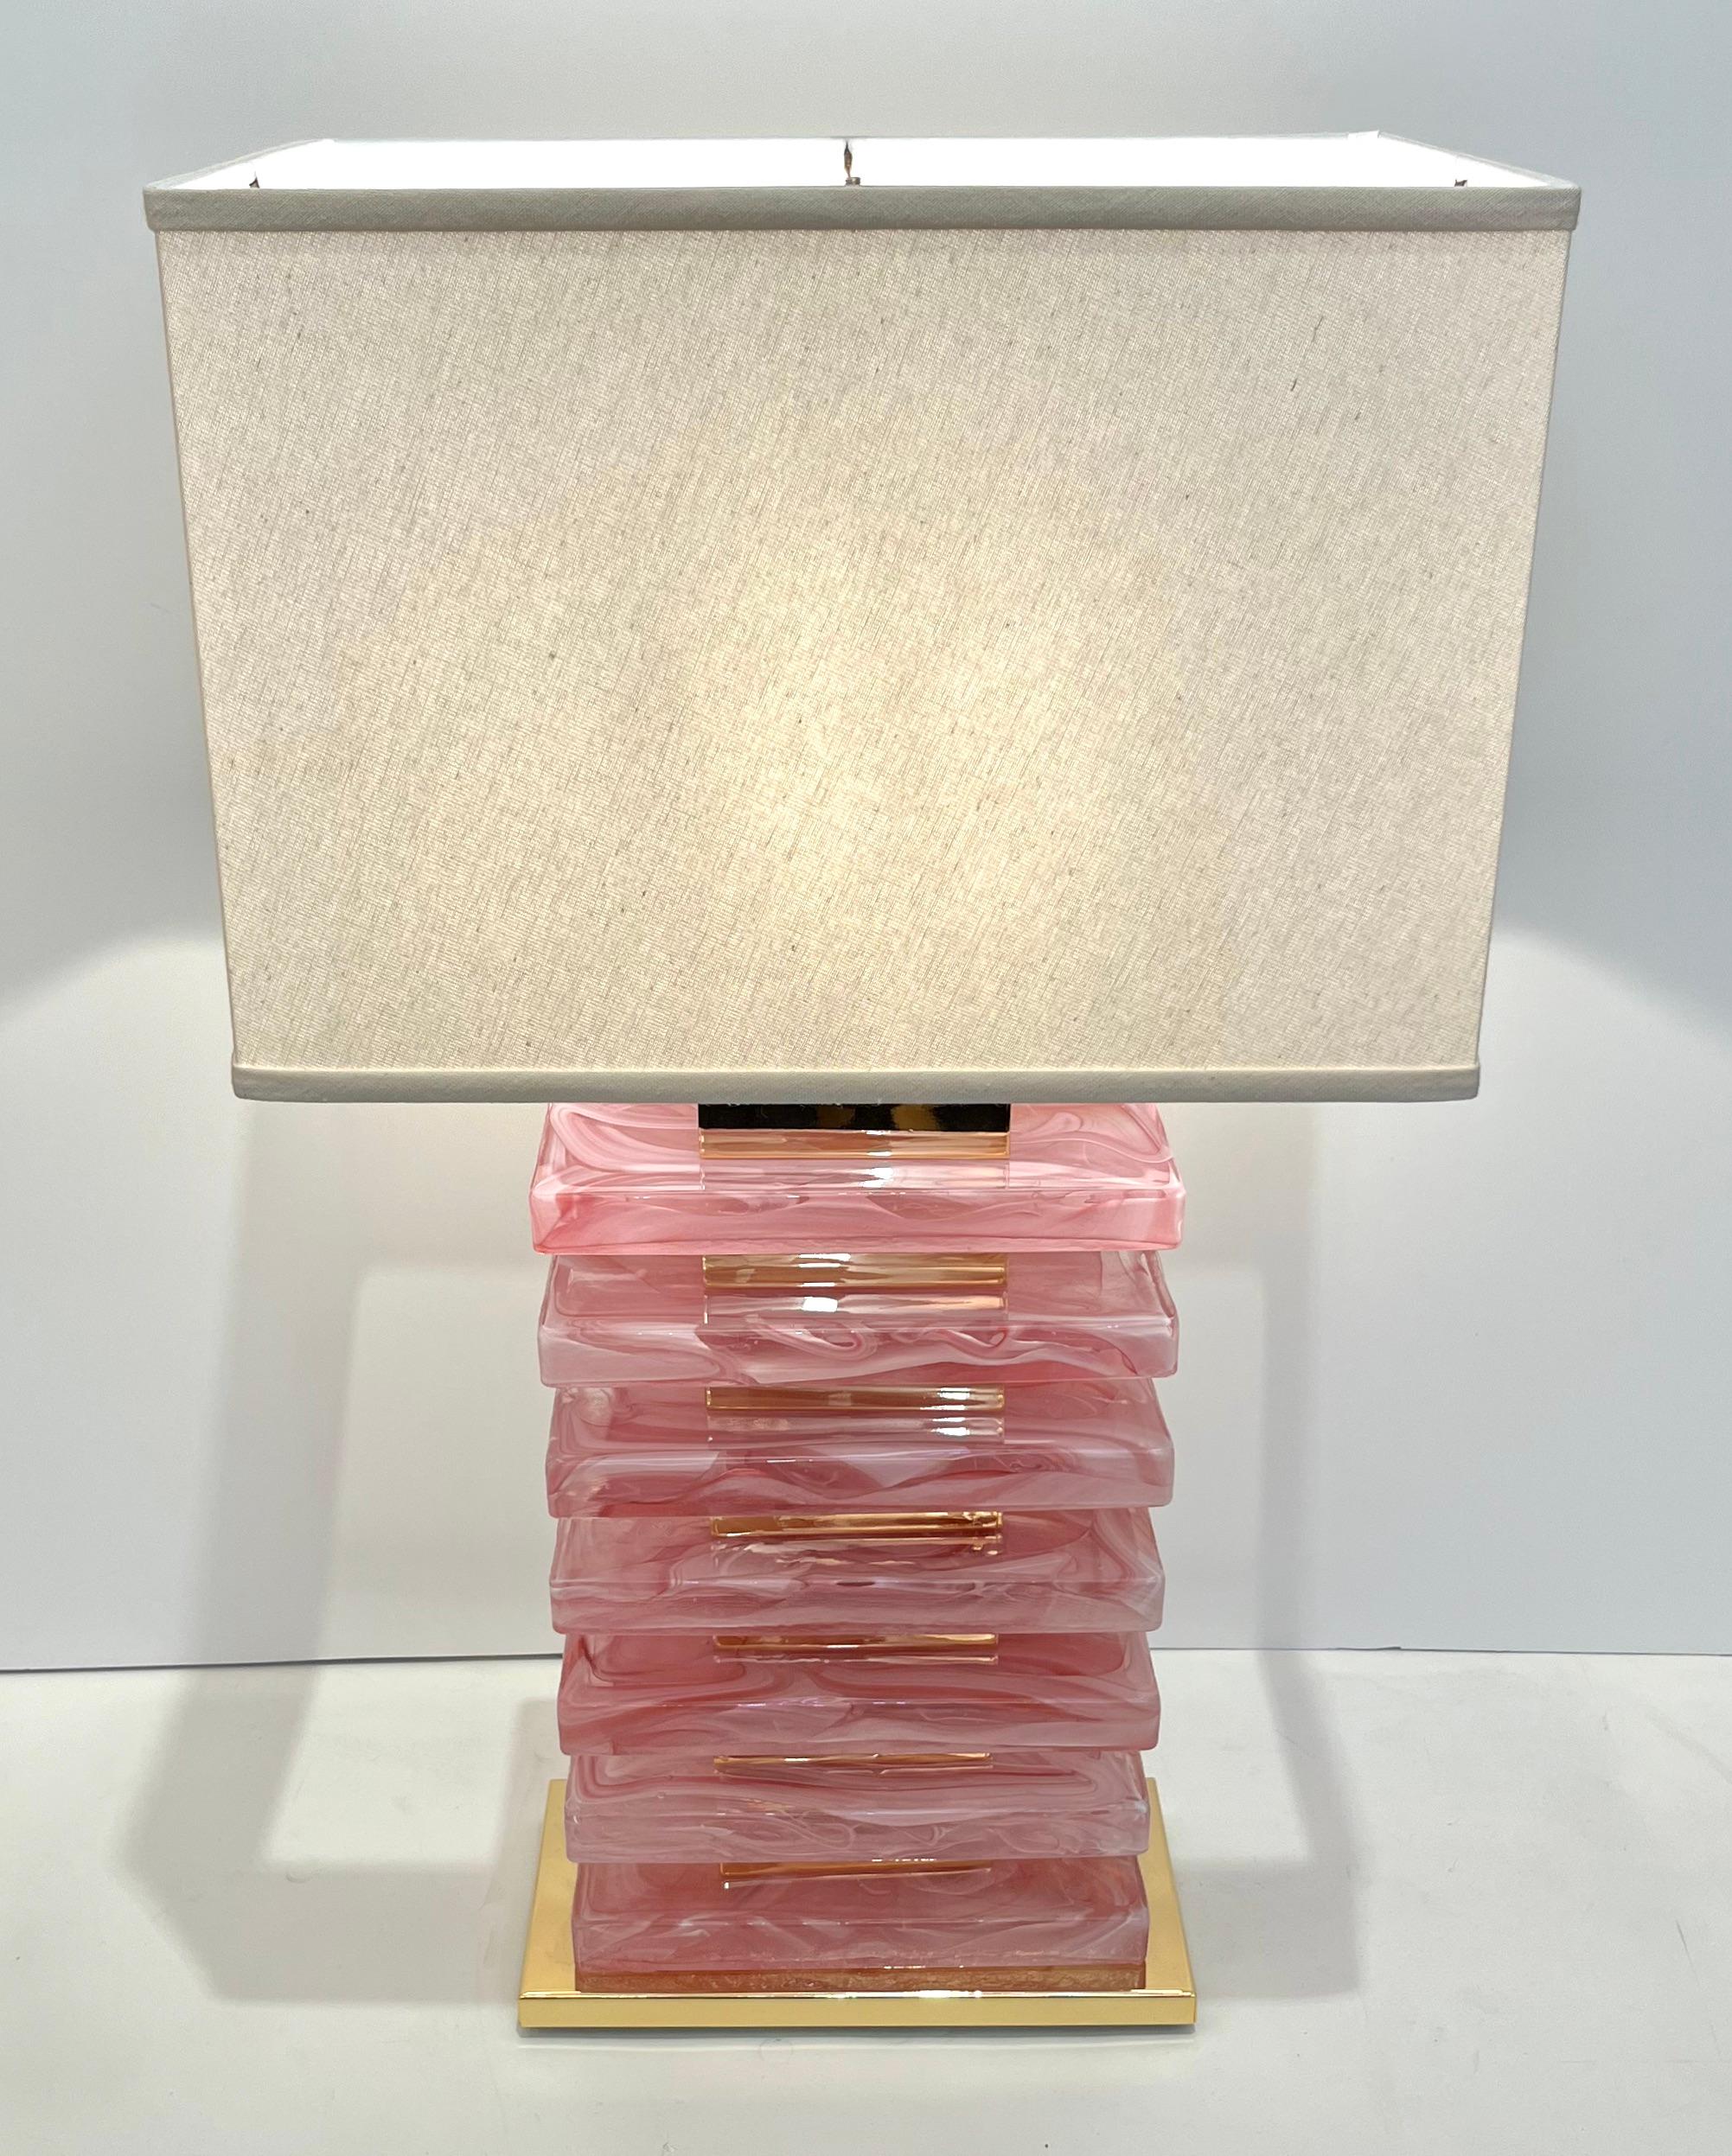 Bespoke pair of Italian lamps with geometric urban design, an architectural creation composed of rectangular organic crystal and rose pink Murano glass blocks variegated with a striking abstract decor in white Murrine, interspersed with bricks of